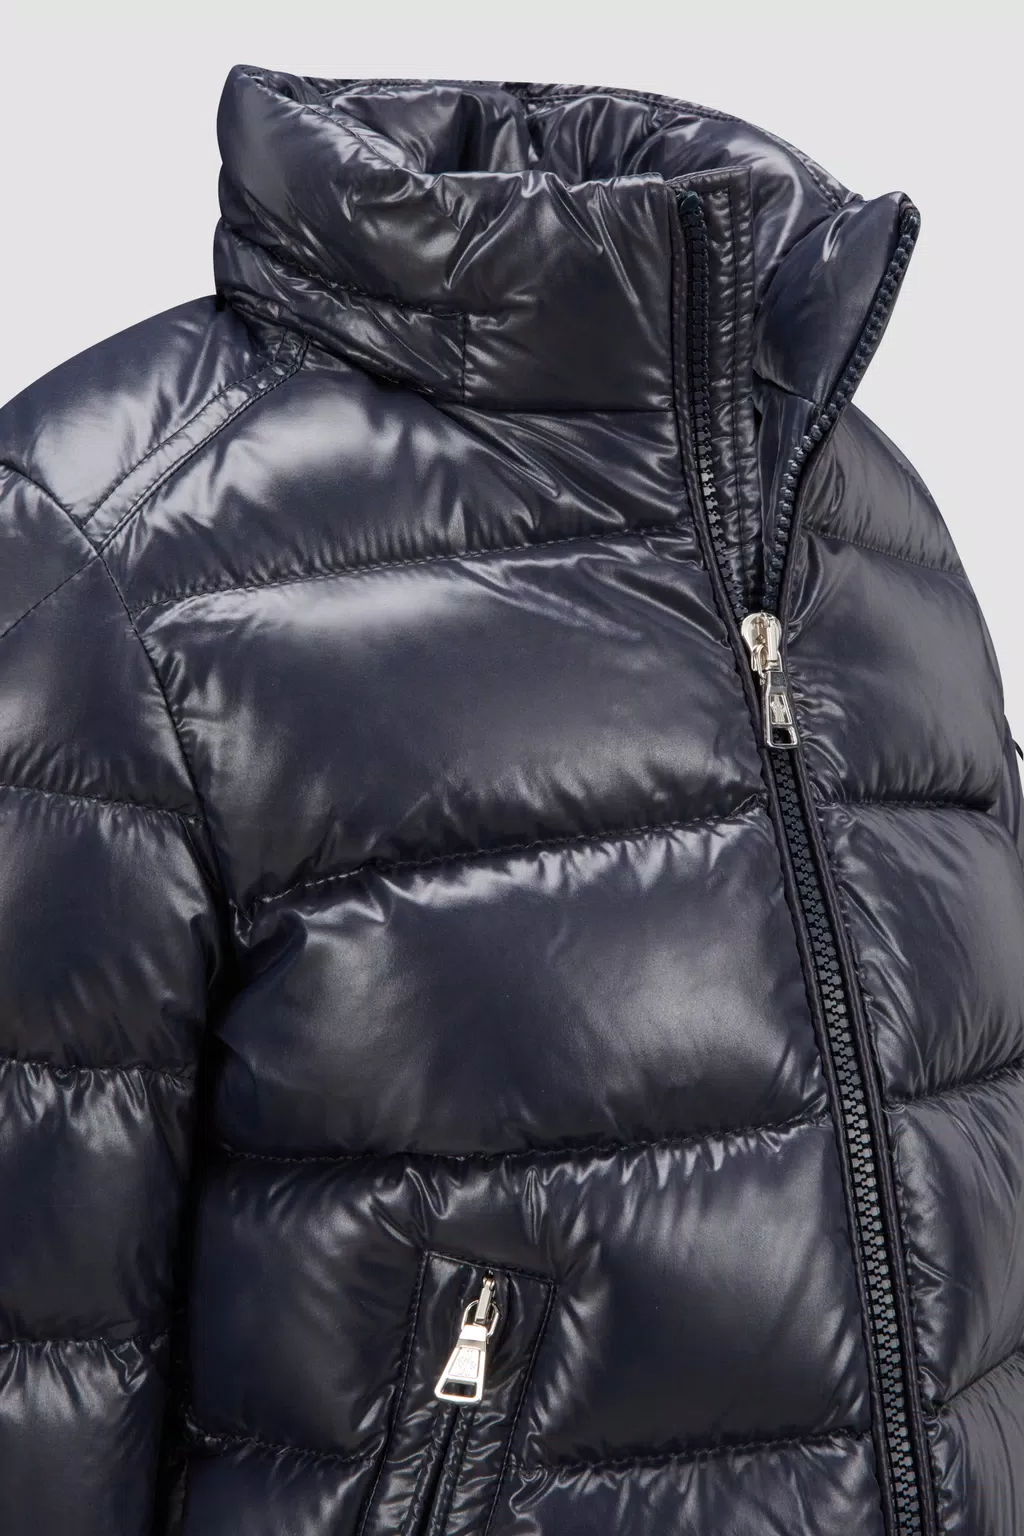 Boys' Clothing - Coats, Down Jackets, Hoodies & Shoes | Moncler